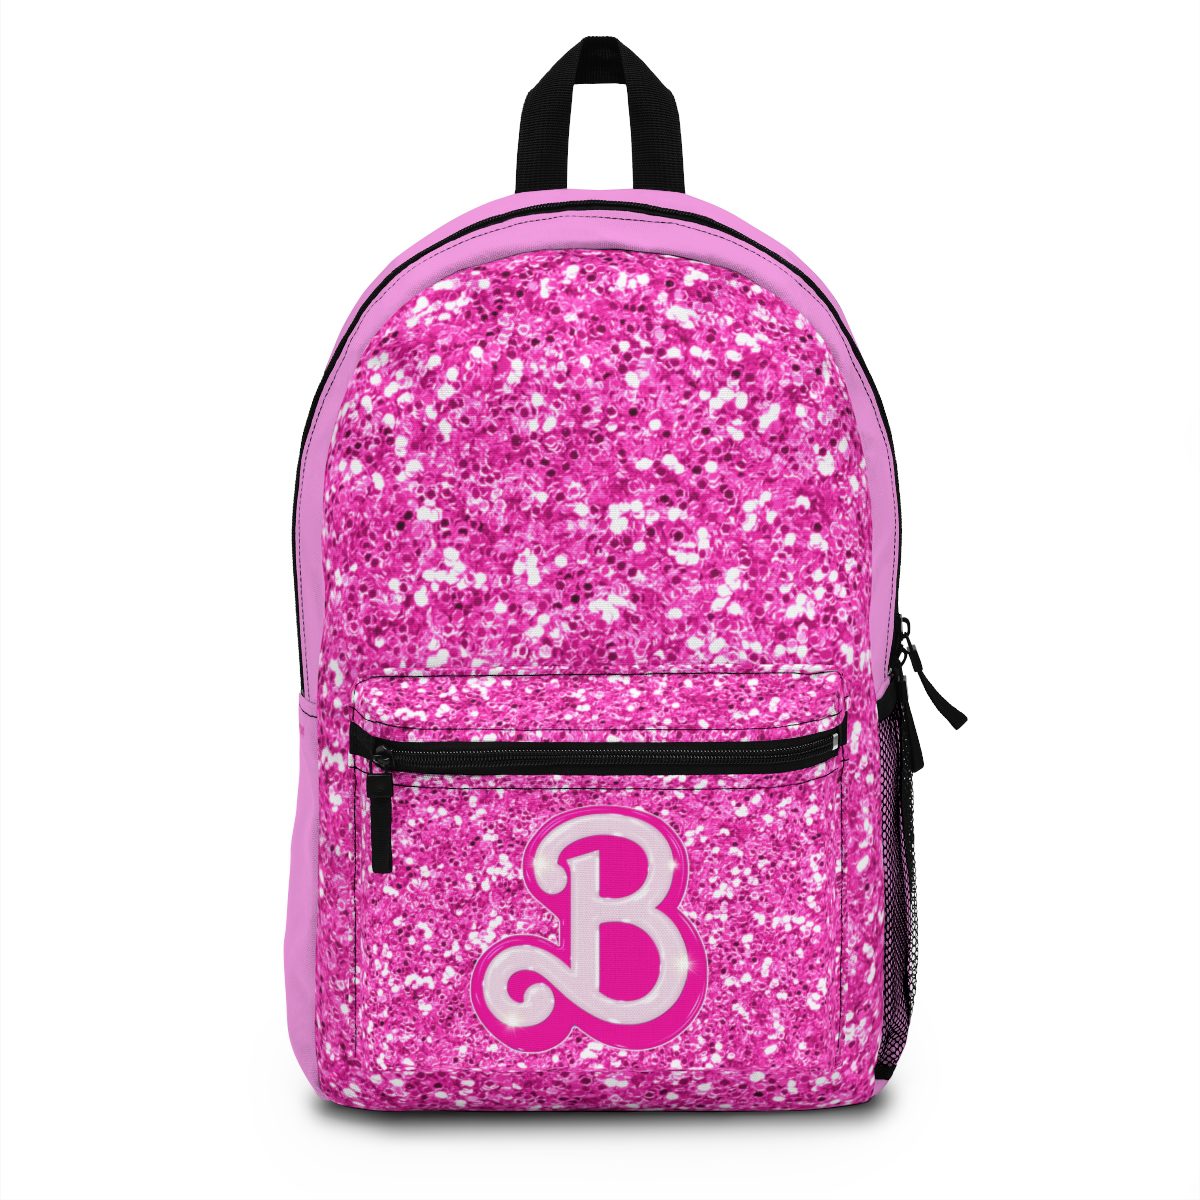 Pink Glitter Simulation Barbie Backpack with Logo on the Front Pocket Cool Kiddo 10